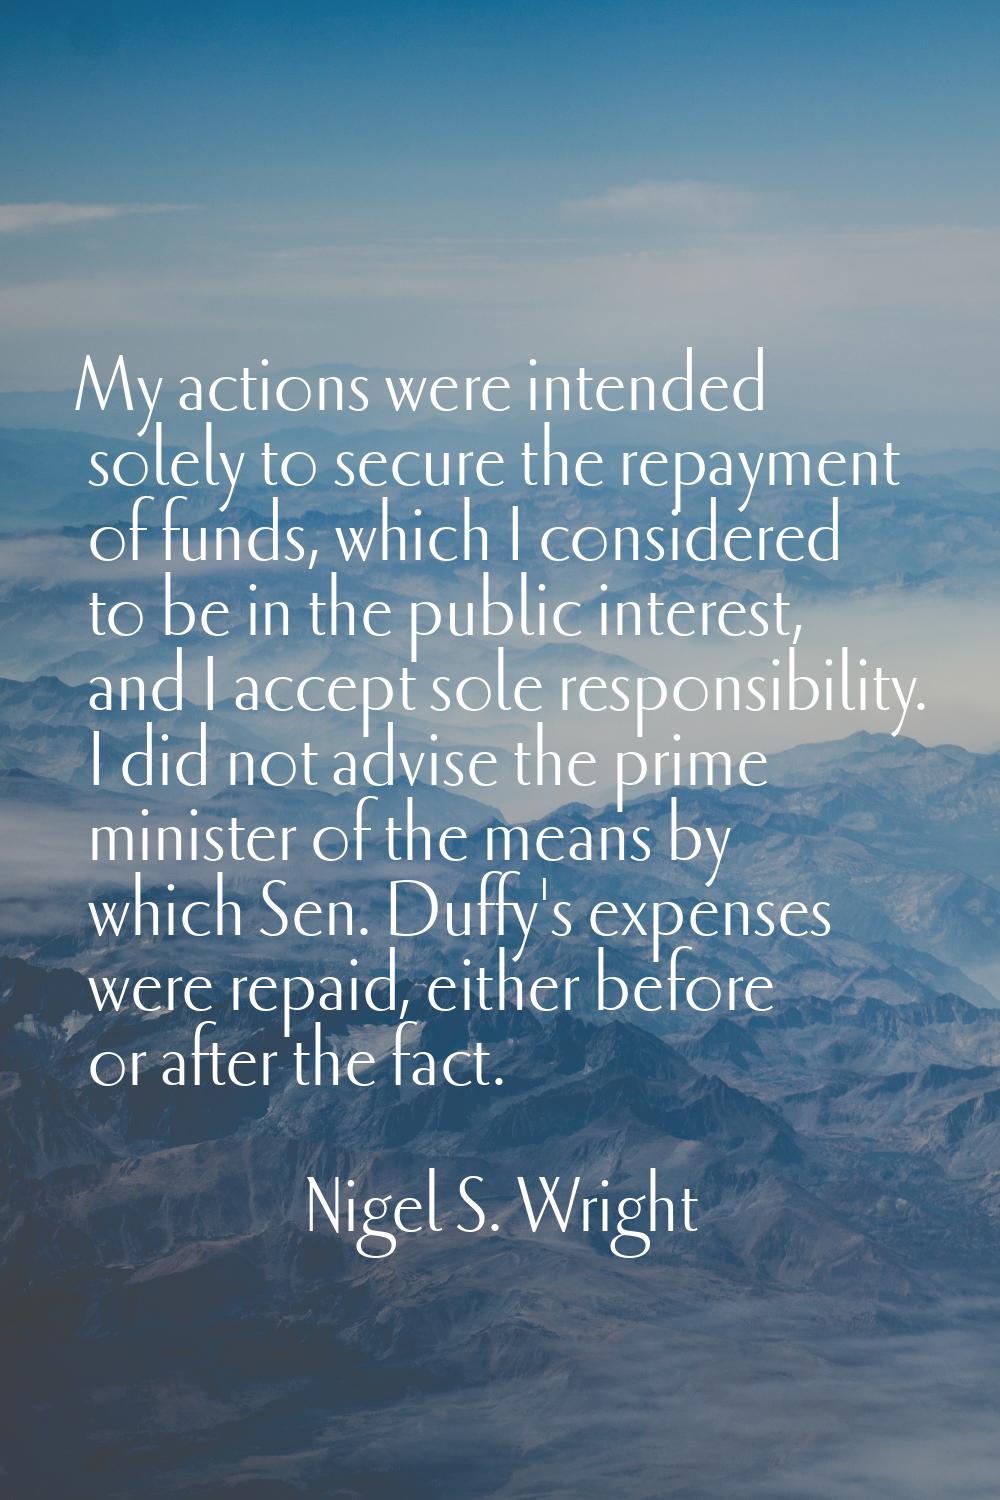 My actions were intended solely to secure the repayment of funds, which I considered to be in the p